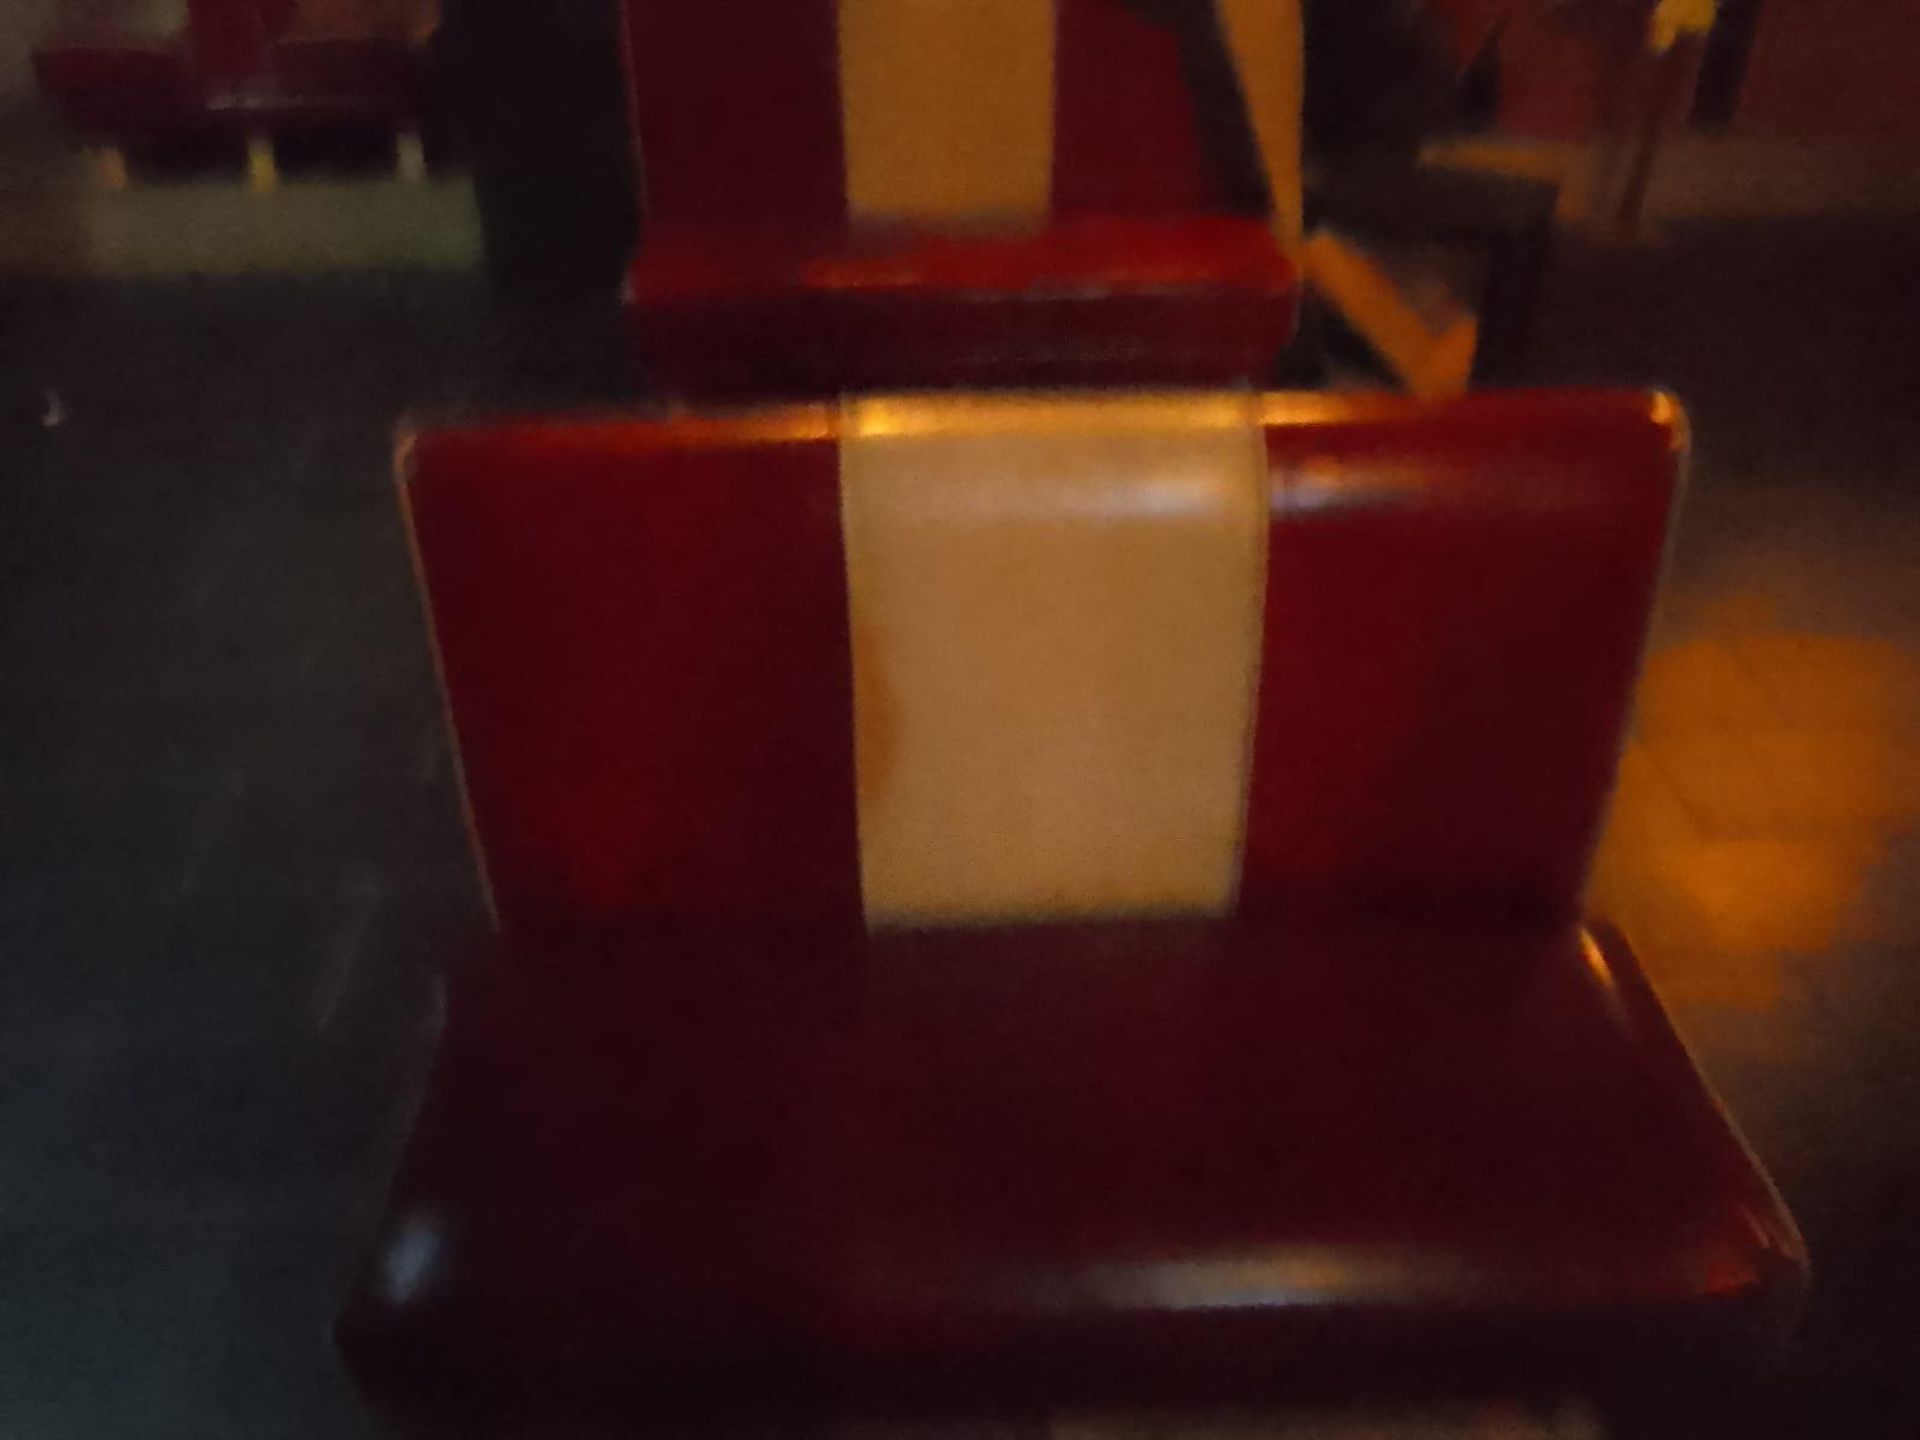 Joblot of Frankie and bennys furniture - Image 9 of 12